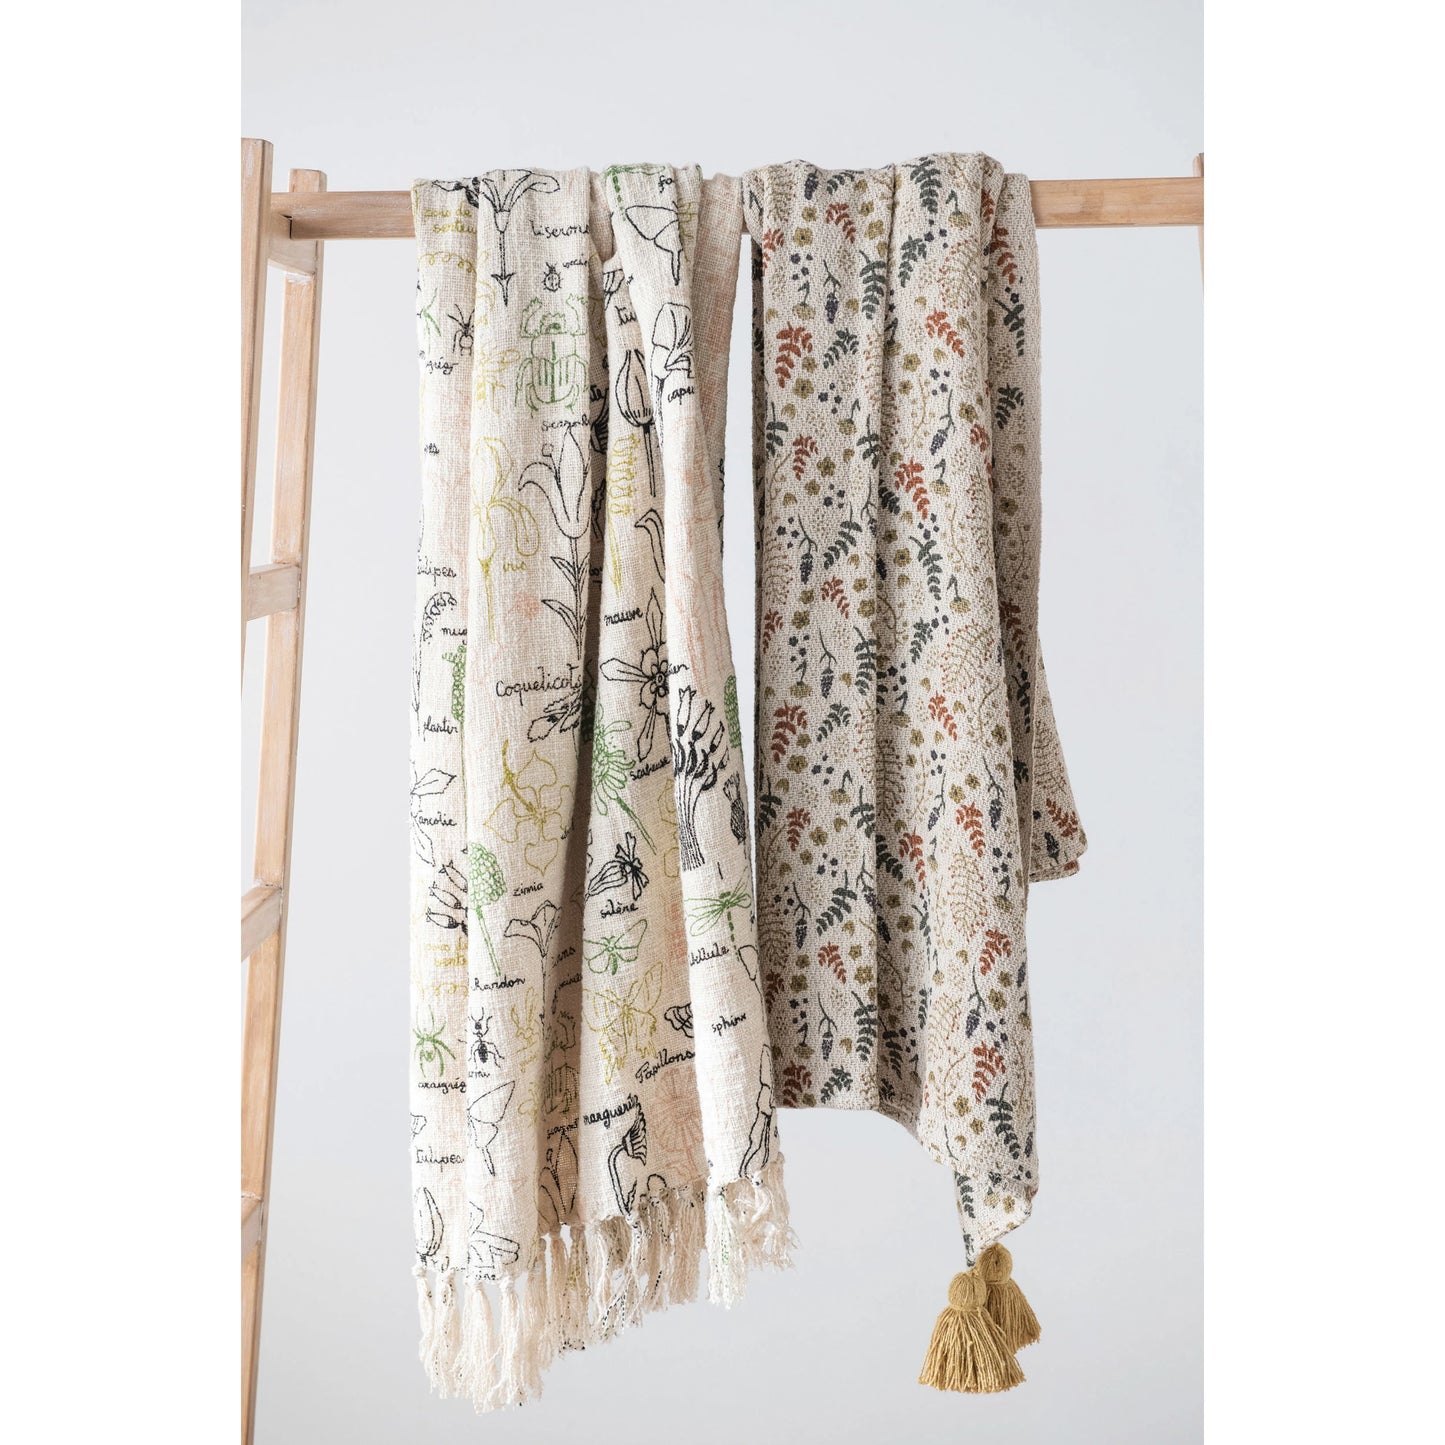 Woven Printed Throw with Tassels